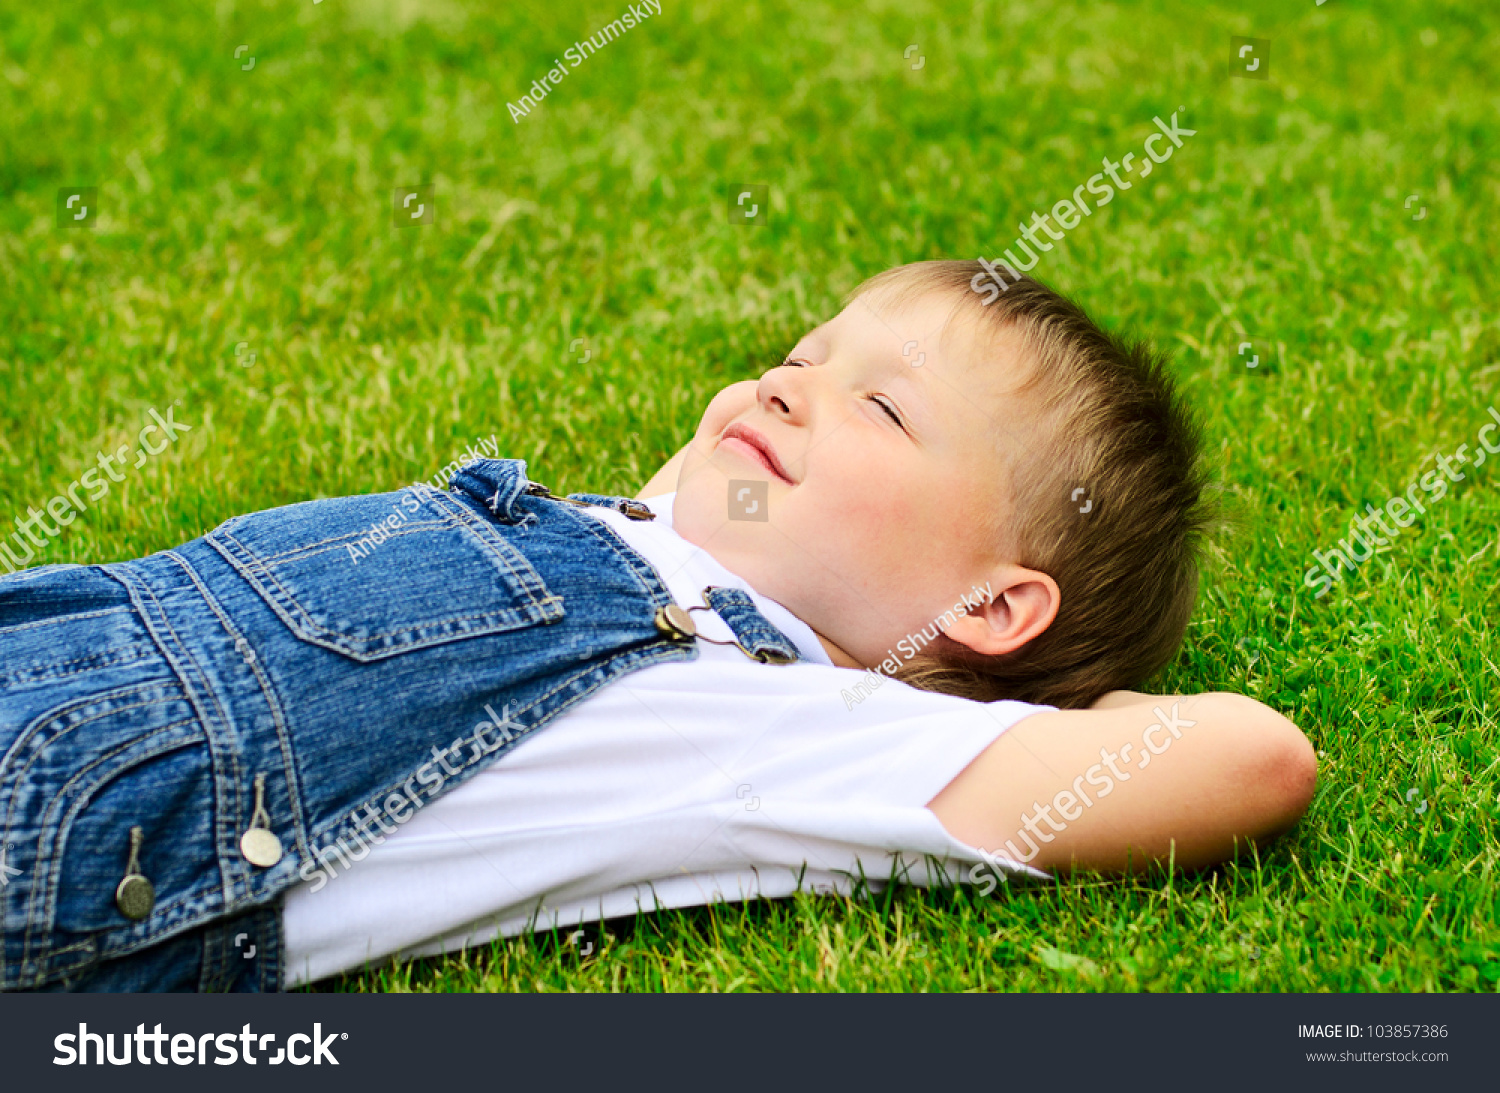 4 Years Old Child Lying On The Grass. Stock Photo ...